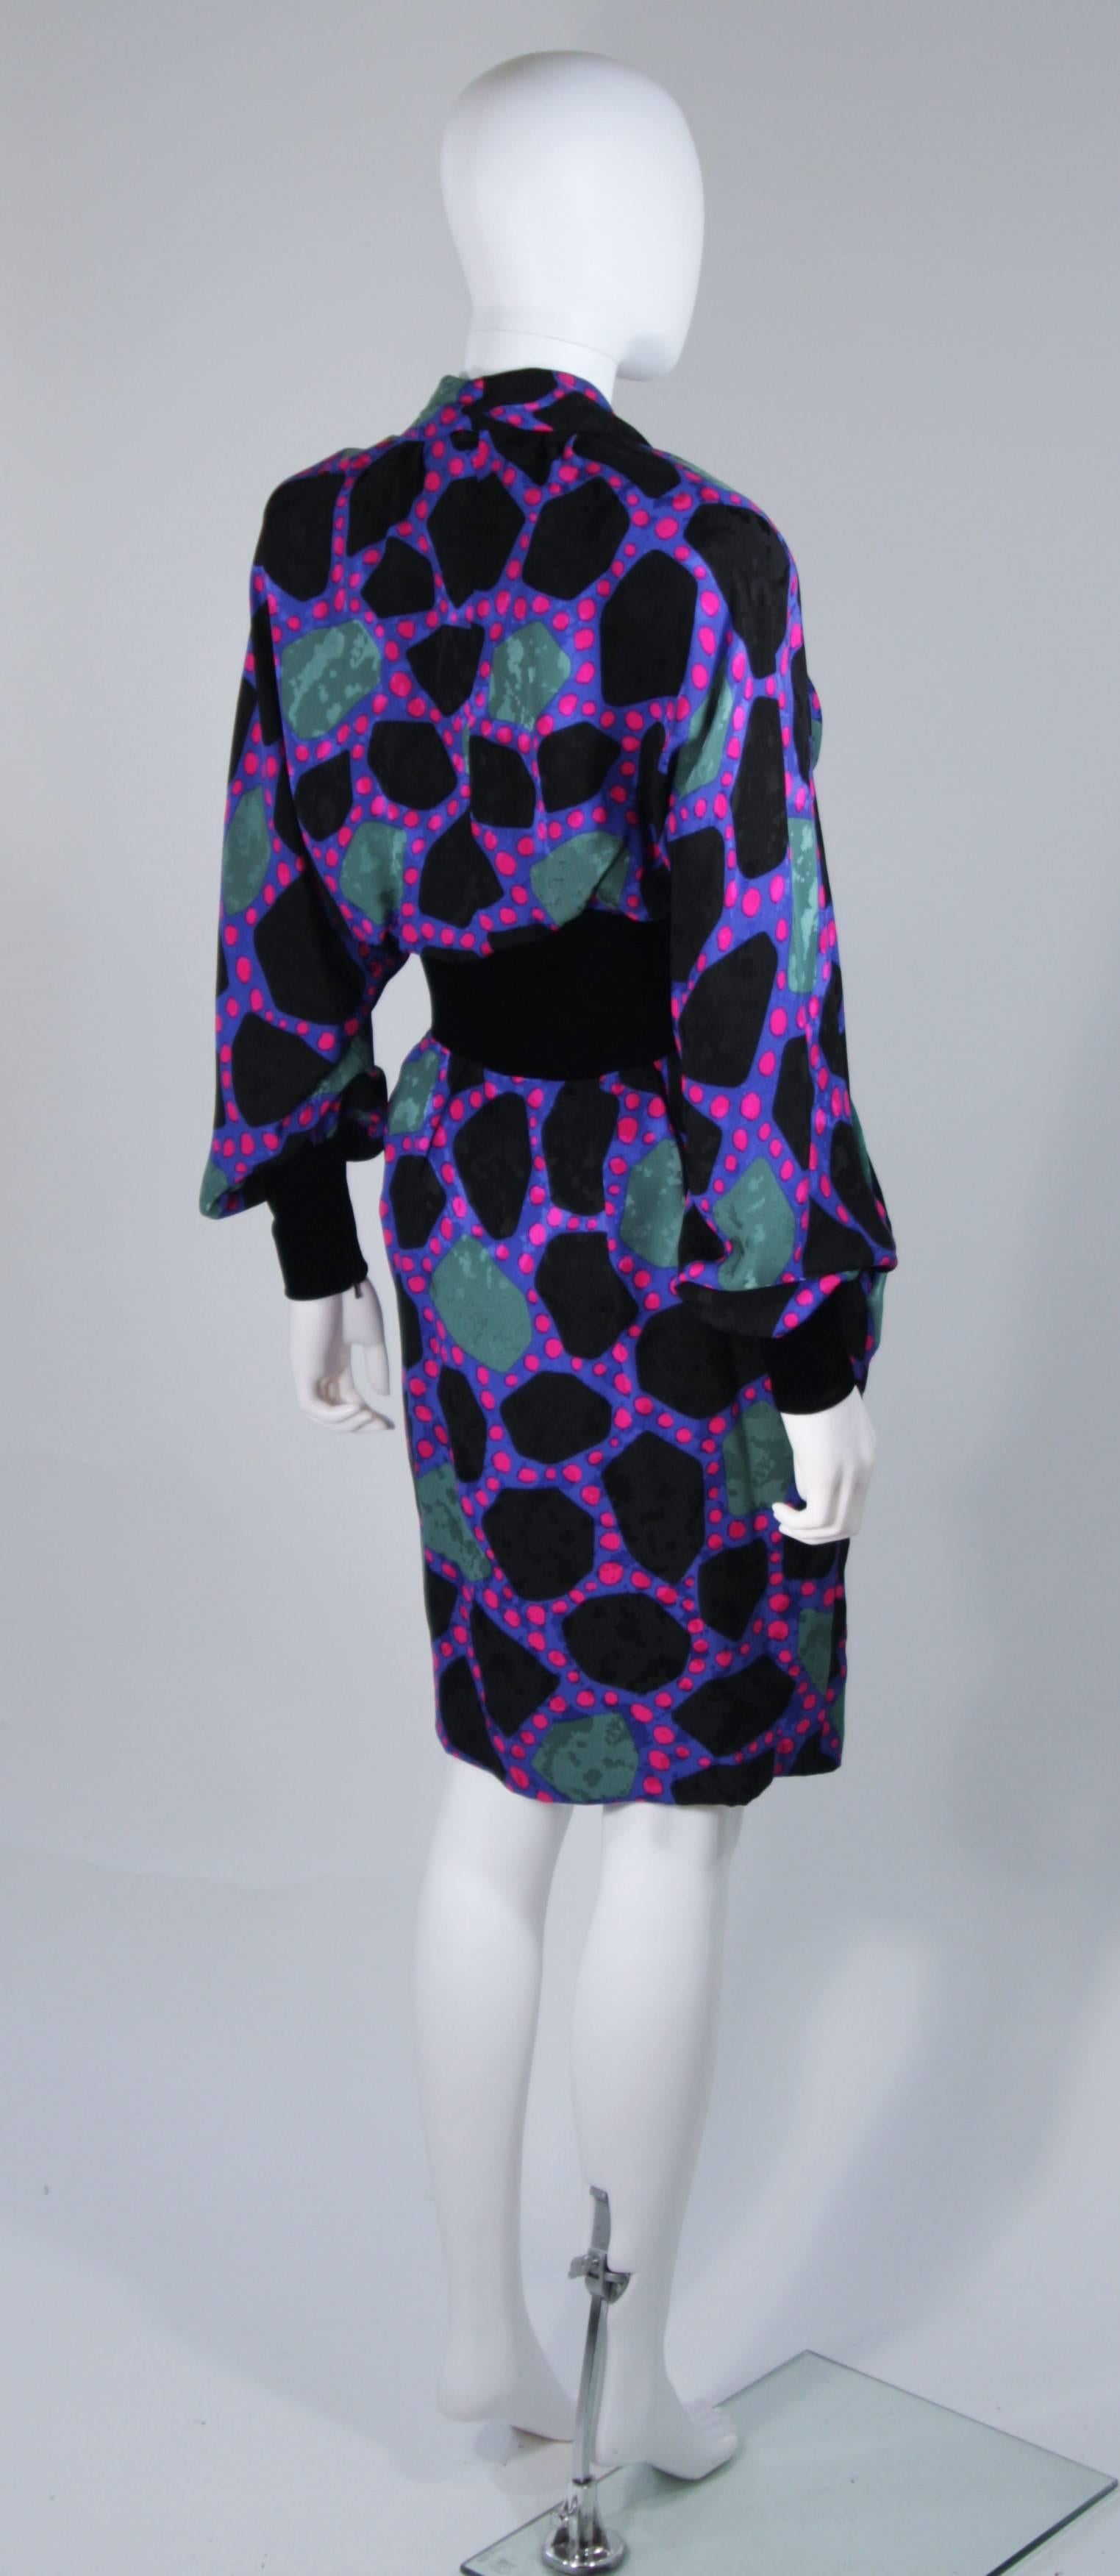 JACQUELINE DE RIBES Circa 1990s Abstract Silk Printed Dress with Velvet Size 6-8 For Sale 3